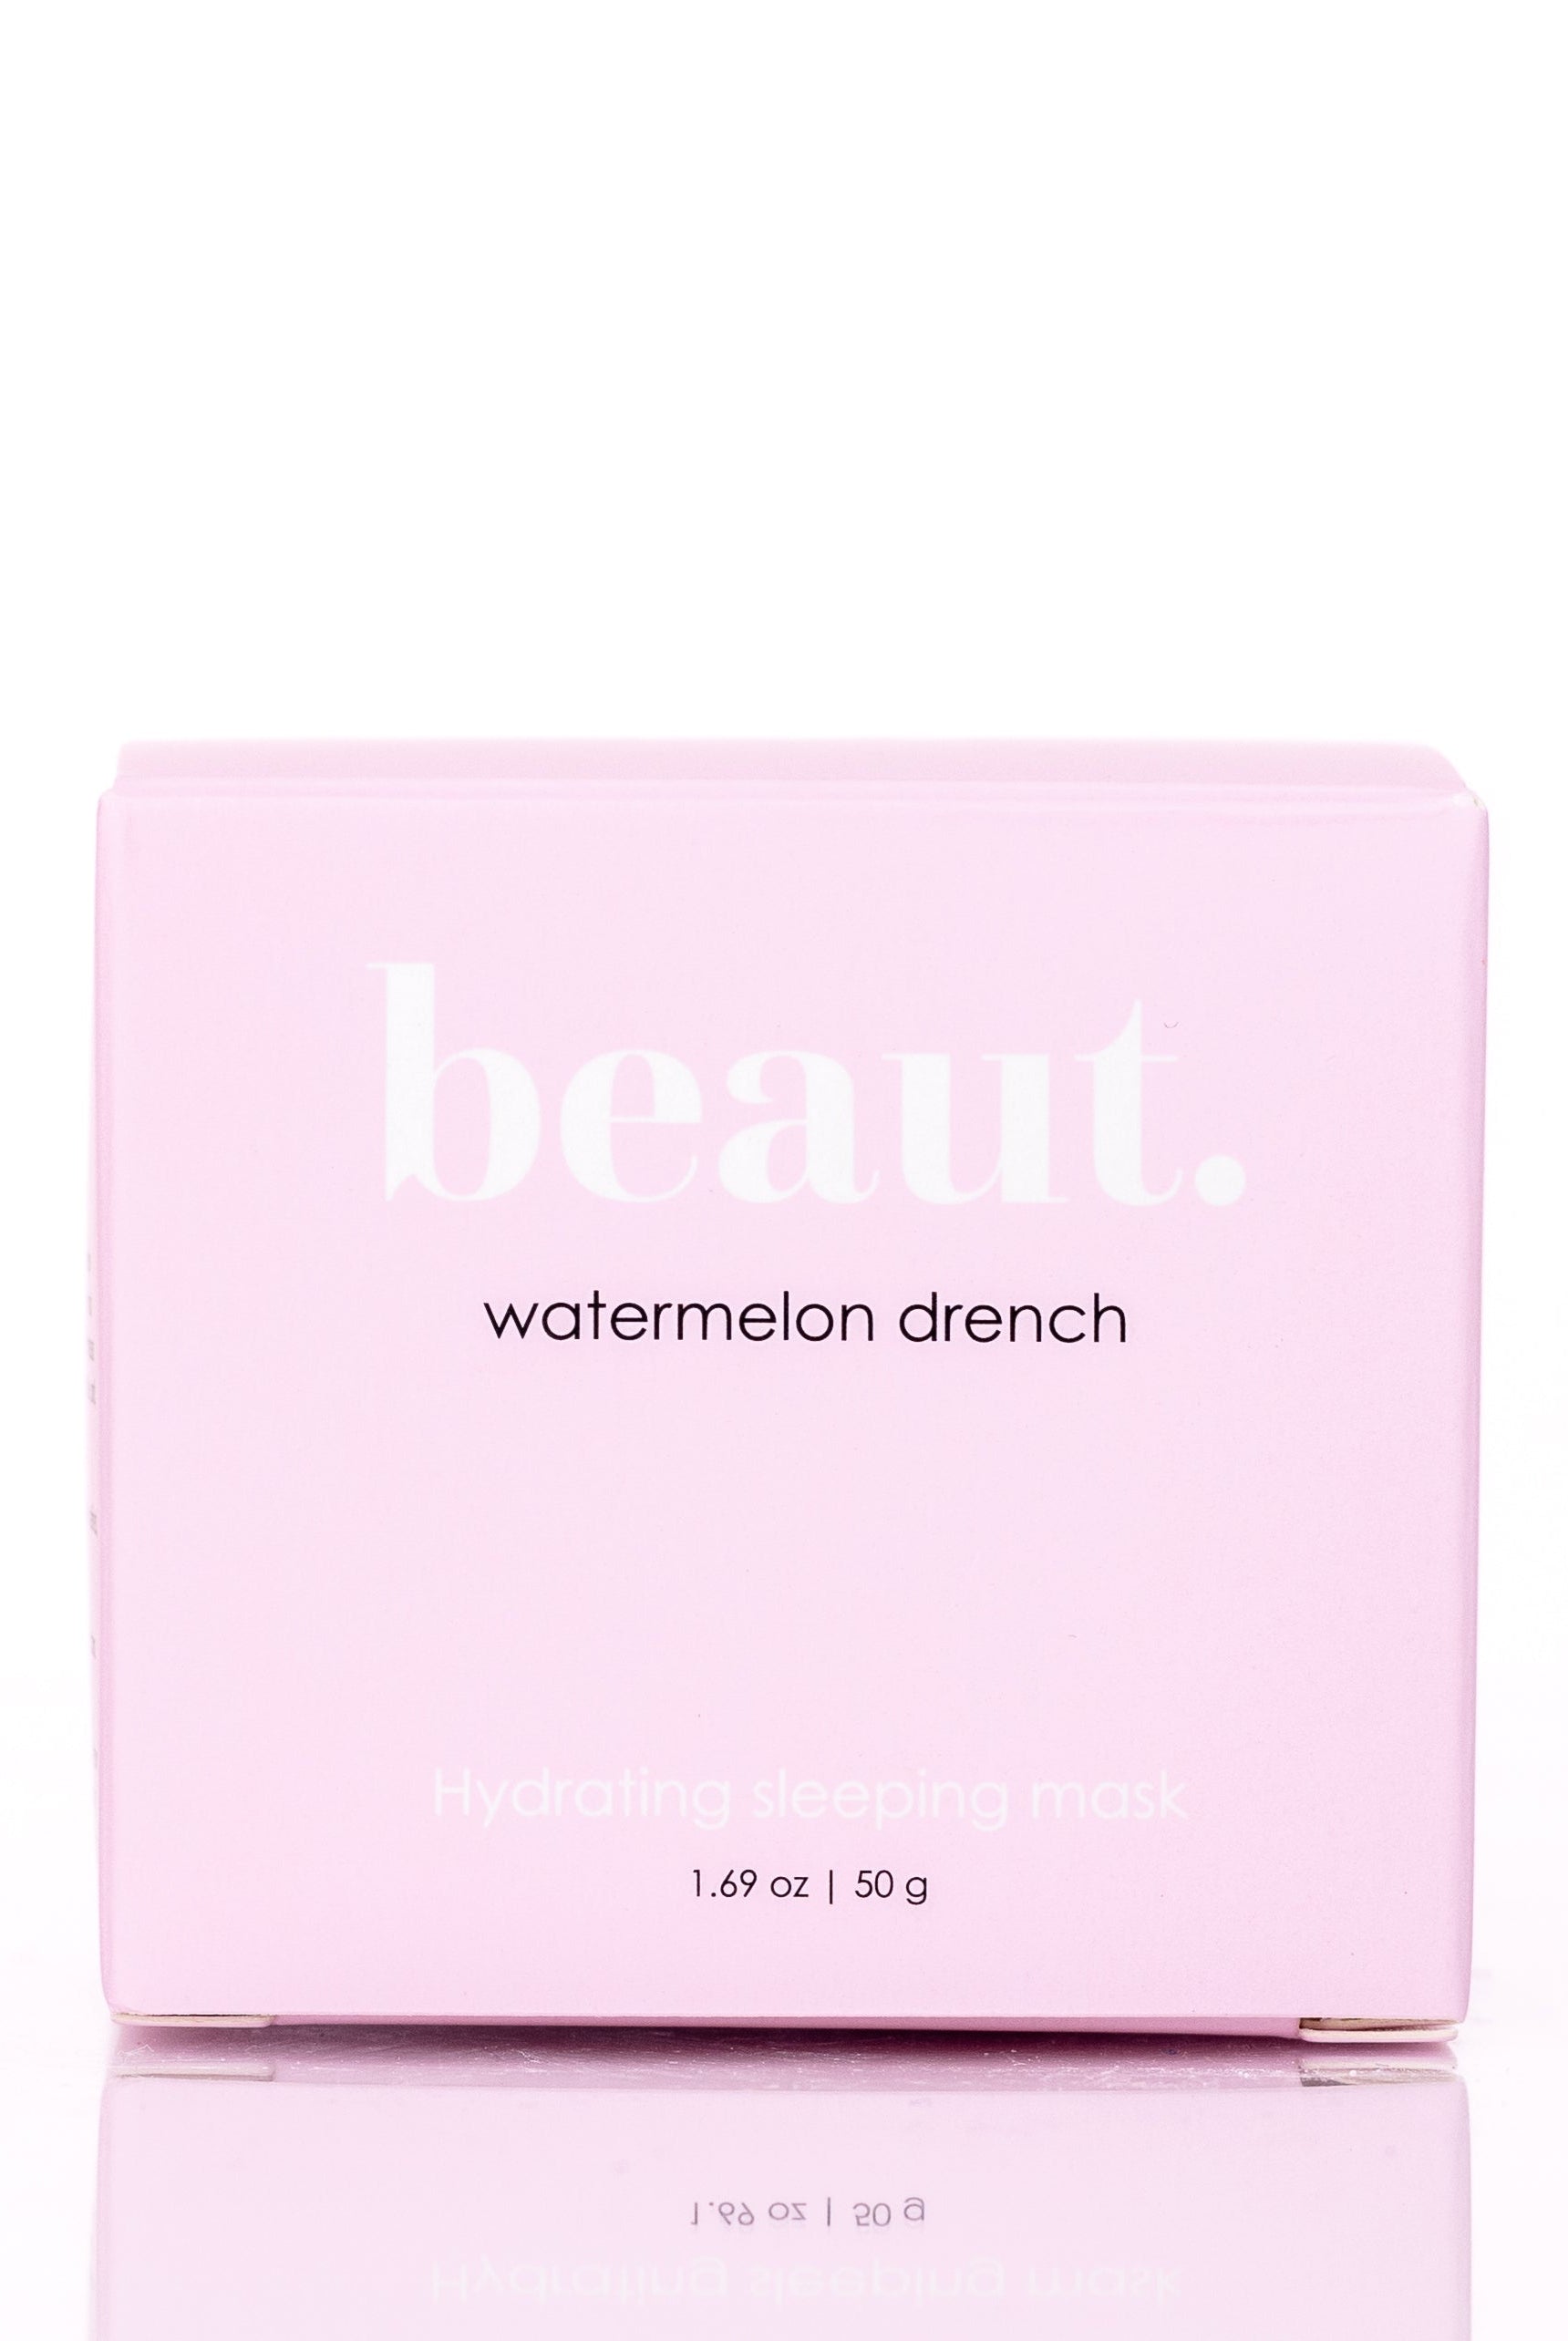 watermelon drench-beaut.beautyco.-The Lovely Closet, Women's Fashion Boutique in Alexandria, KY